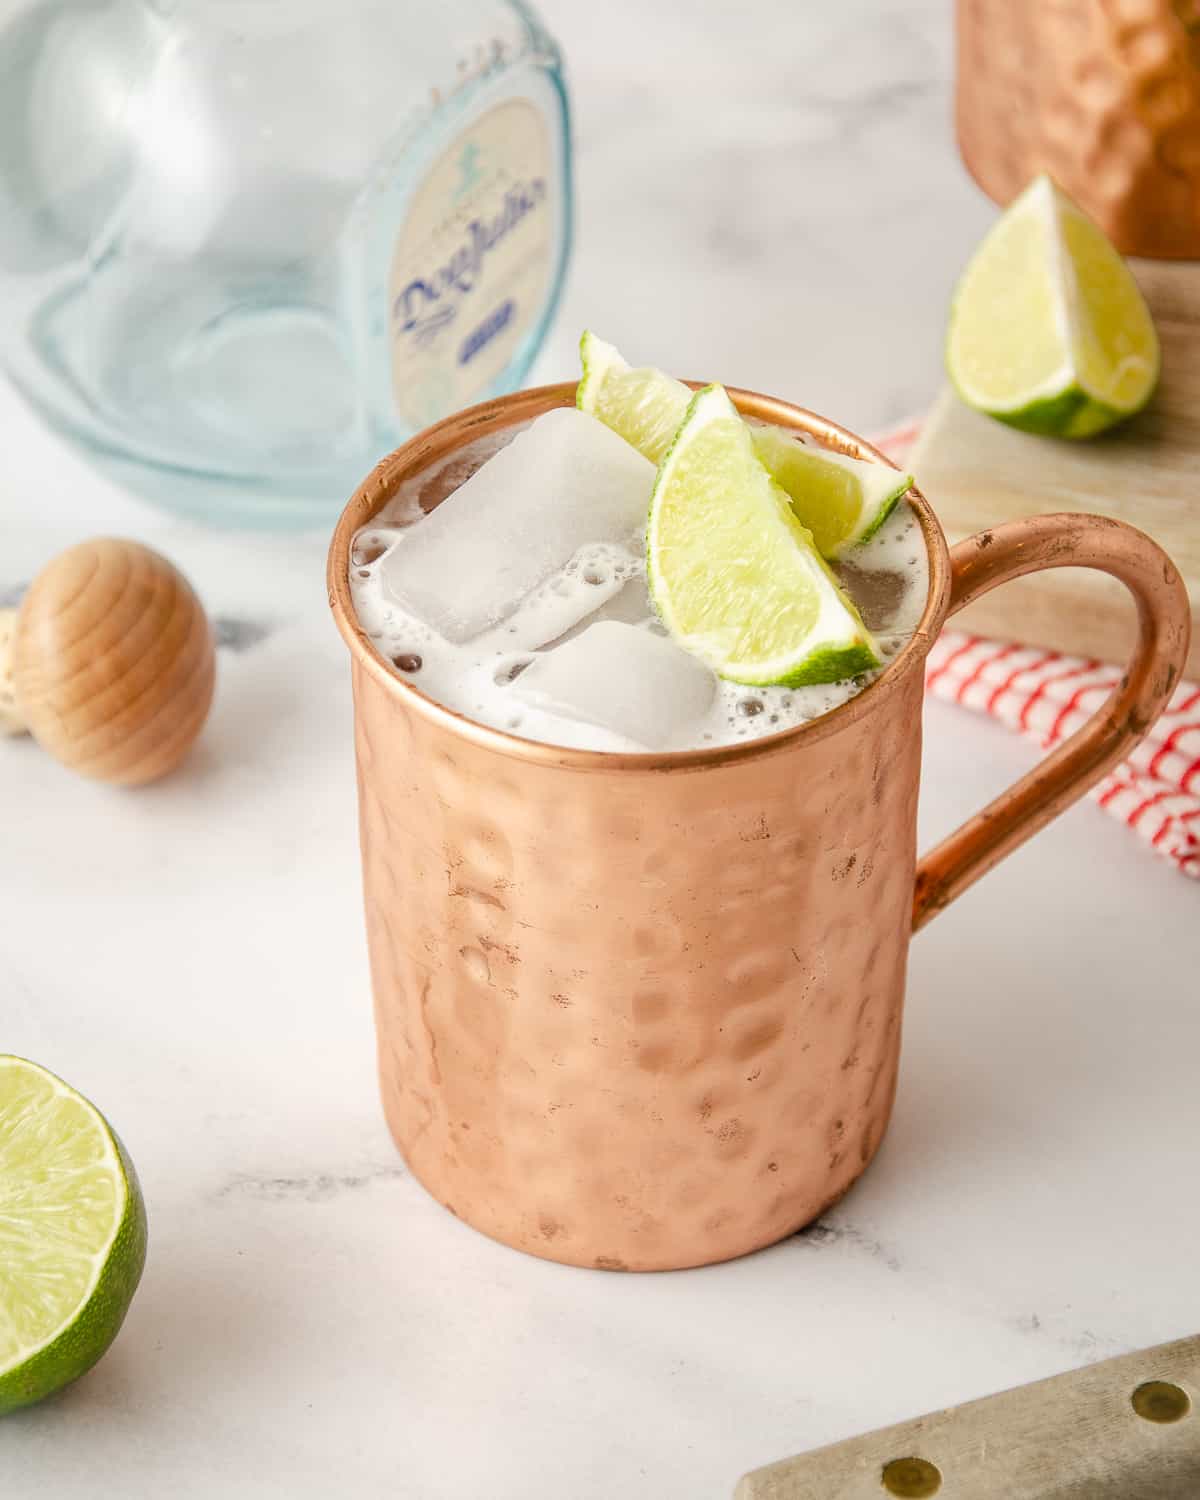 A copper mug with a tequila mule inside it on a marble counter with a bottle of tequila behind it.